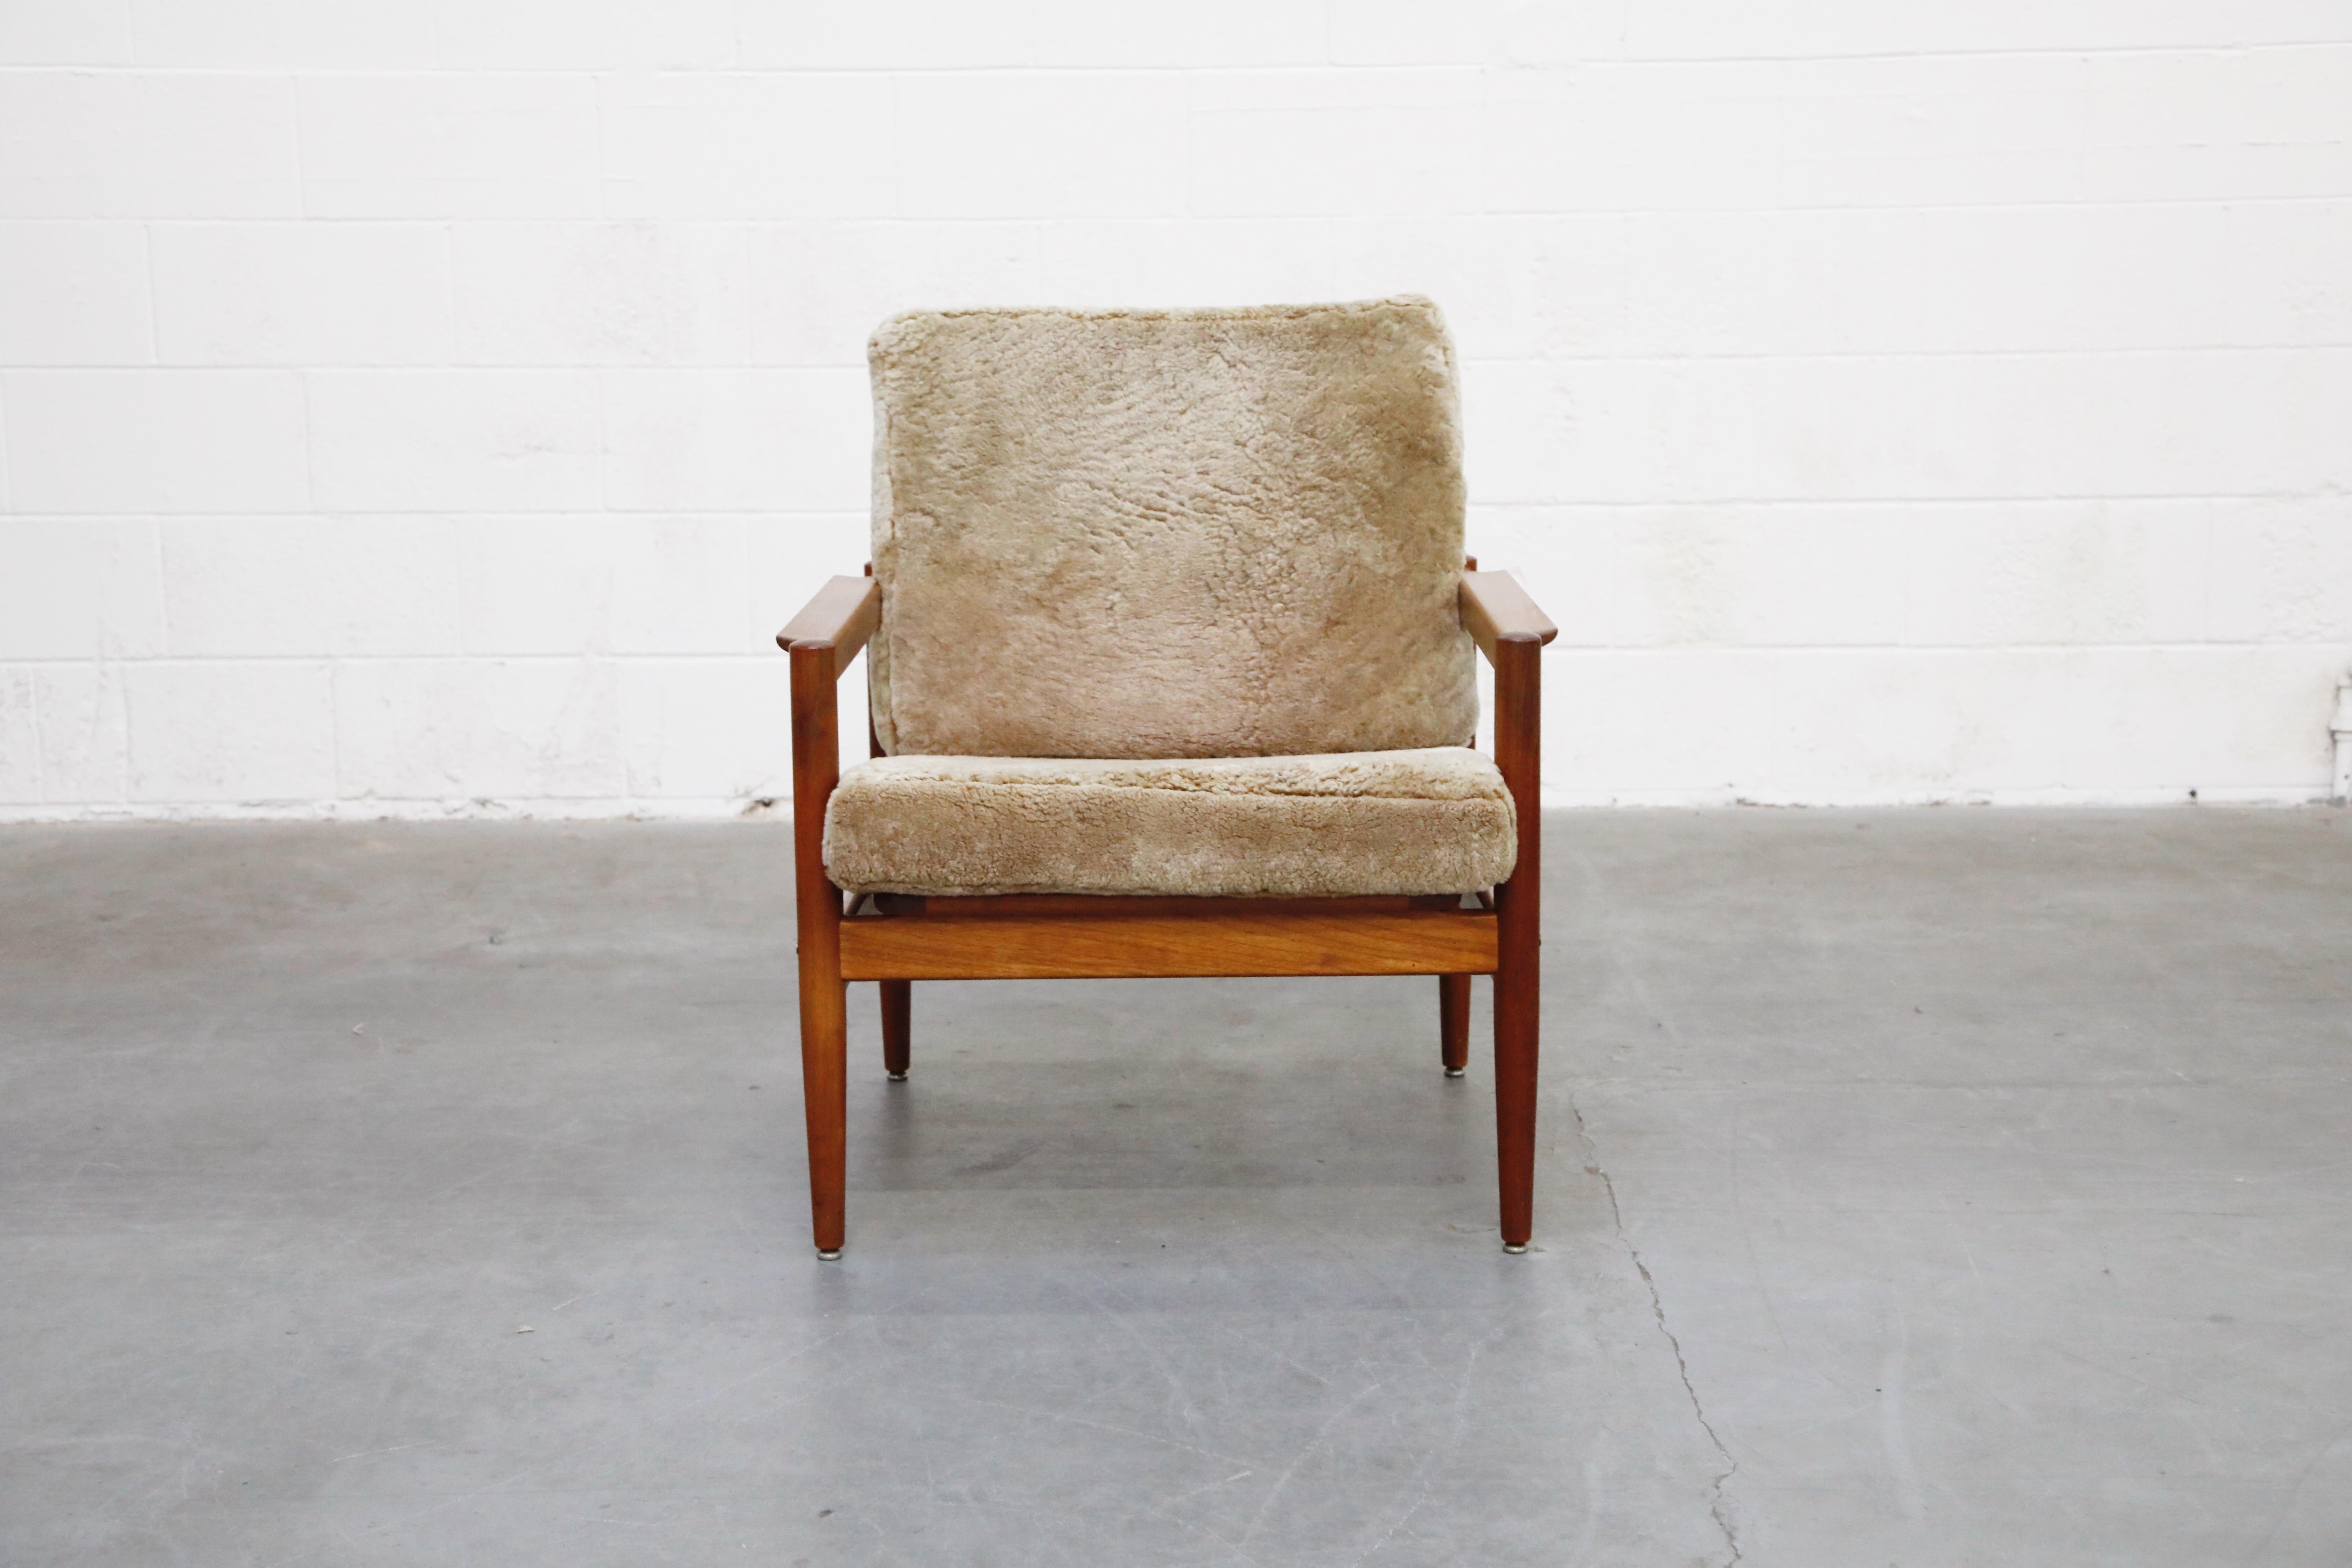 Mid-20th Century Teak and Shearling Fur Lounge Chairs by Børge Jensen & Sønner, 1960s, Signed